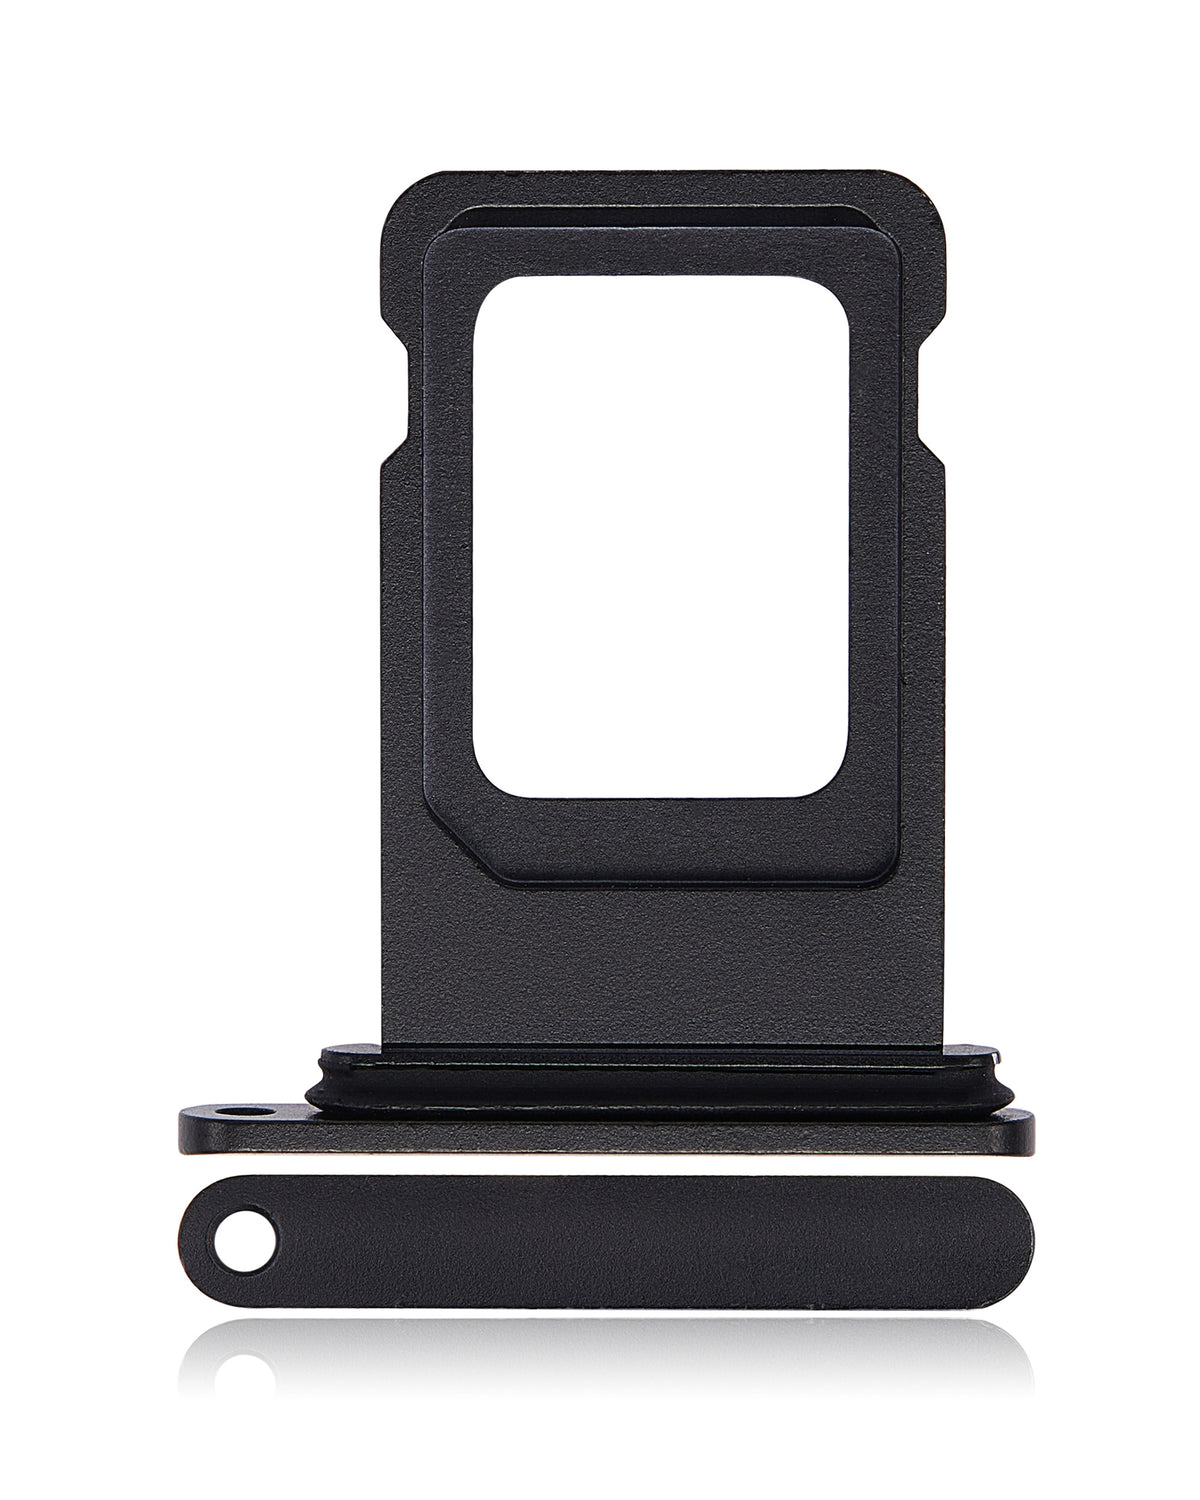 BLACK DUAL SIM CARD TRAY COMPATIBLE WITH IPHONE XR